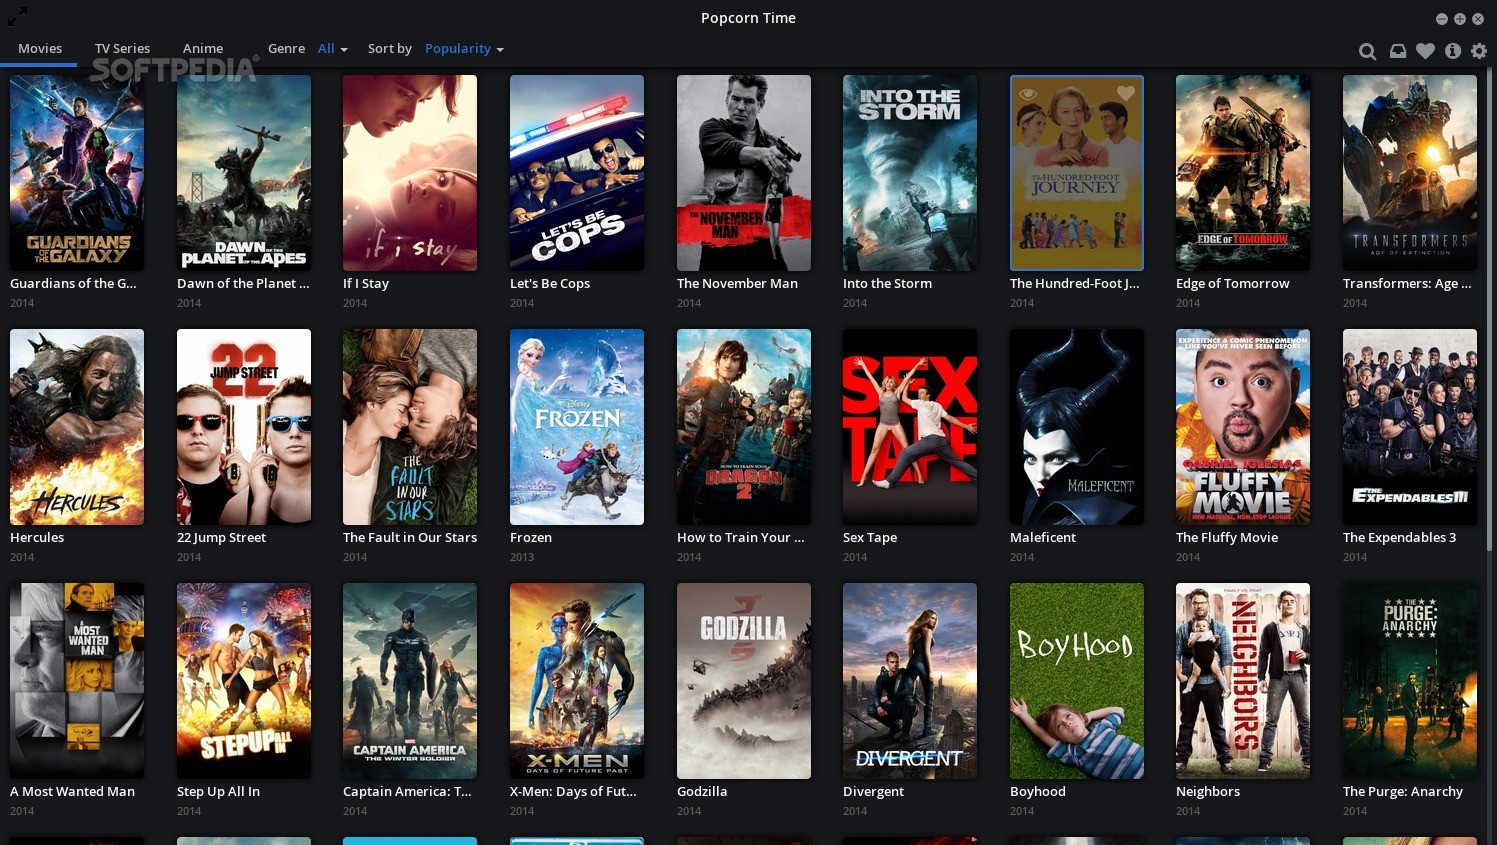 How to download movies with popcorn time